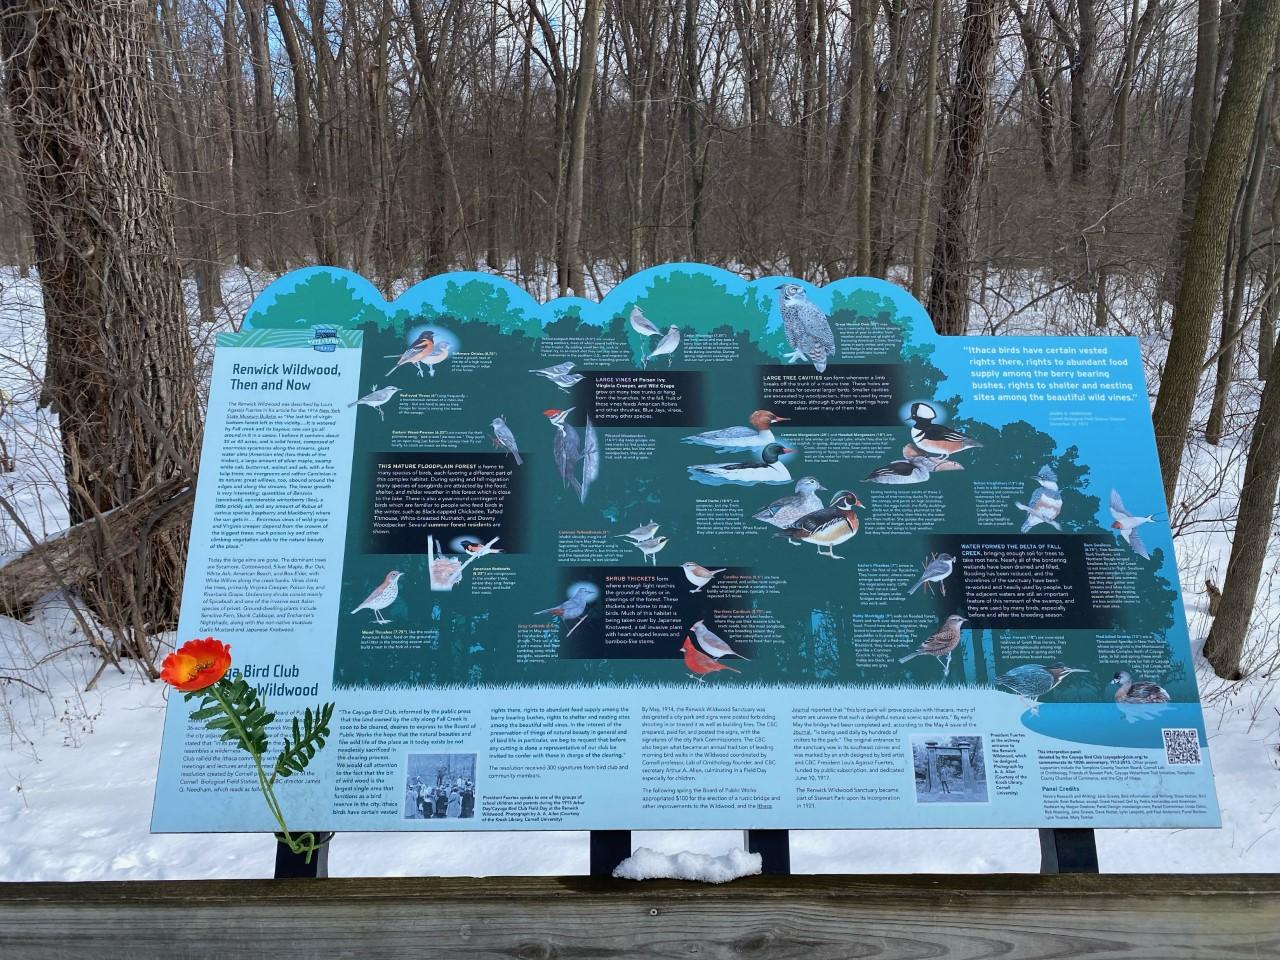 A sign in the Renwick Woods describes some of the bird species that birders can find in the park. The photos can help people identify birds and differentiate between similar-looking species. /Photo: BRIDGET HAGEN